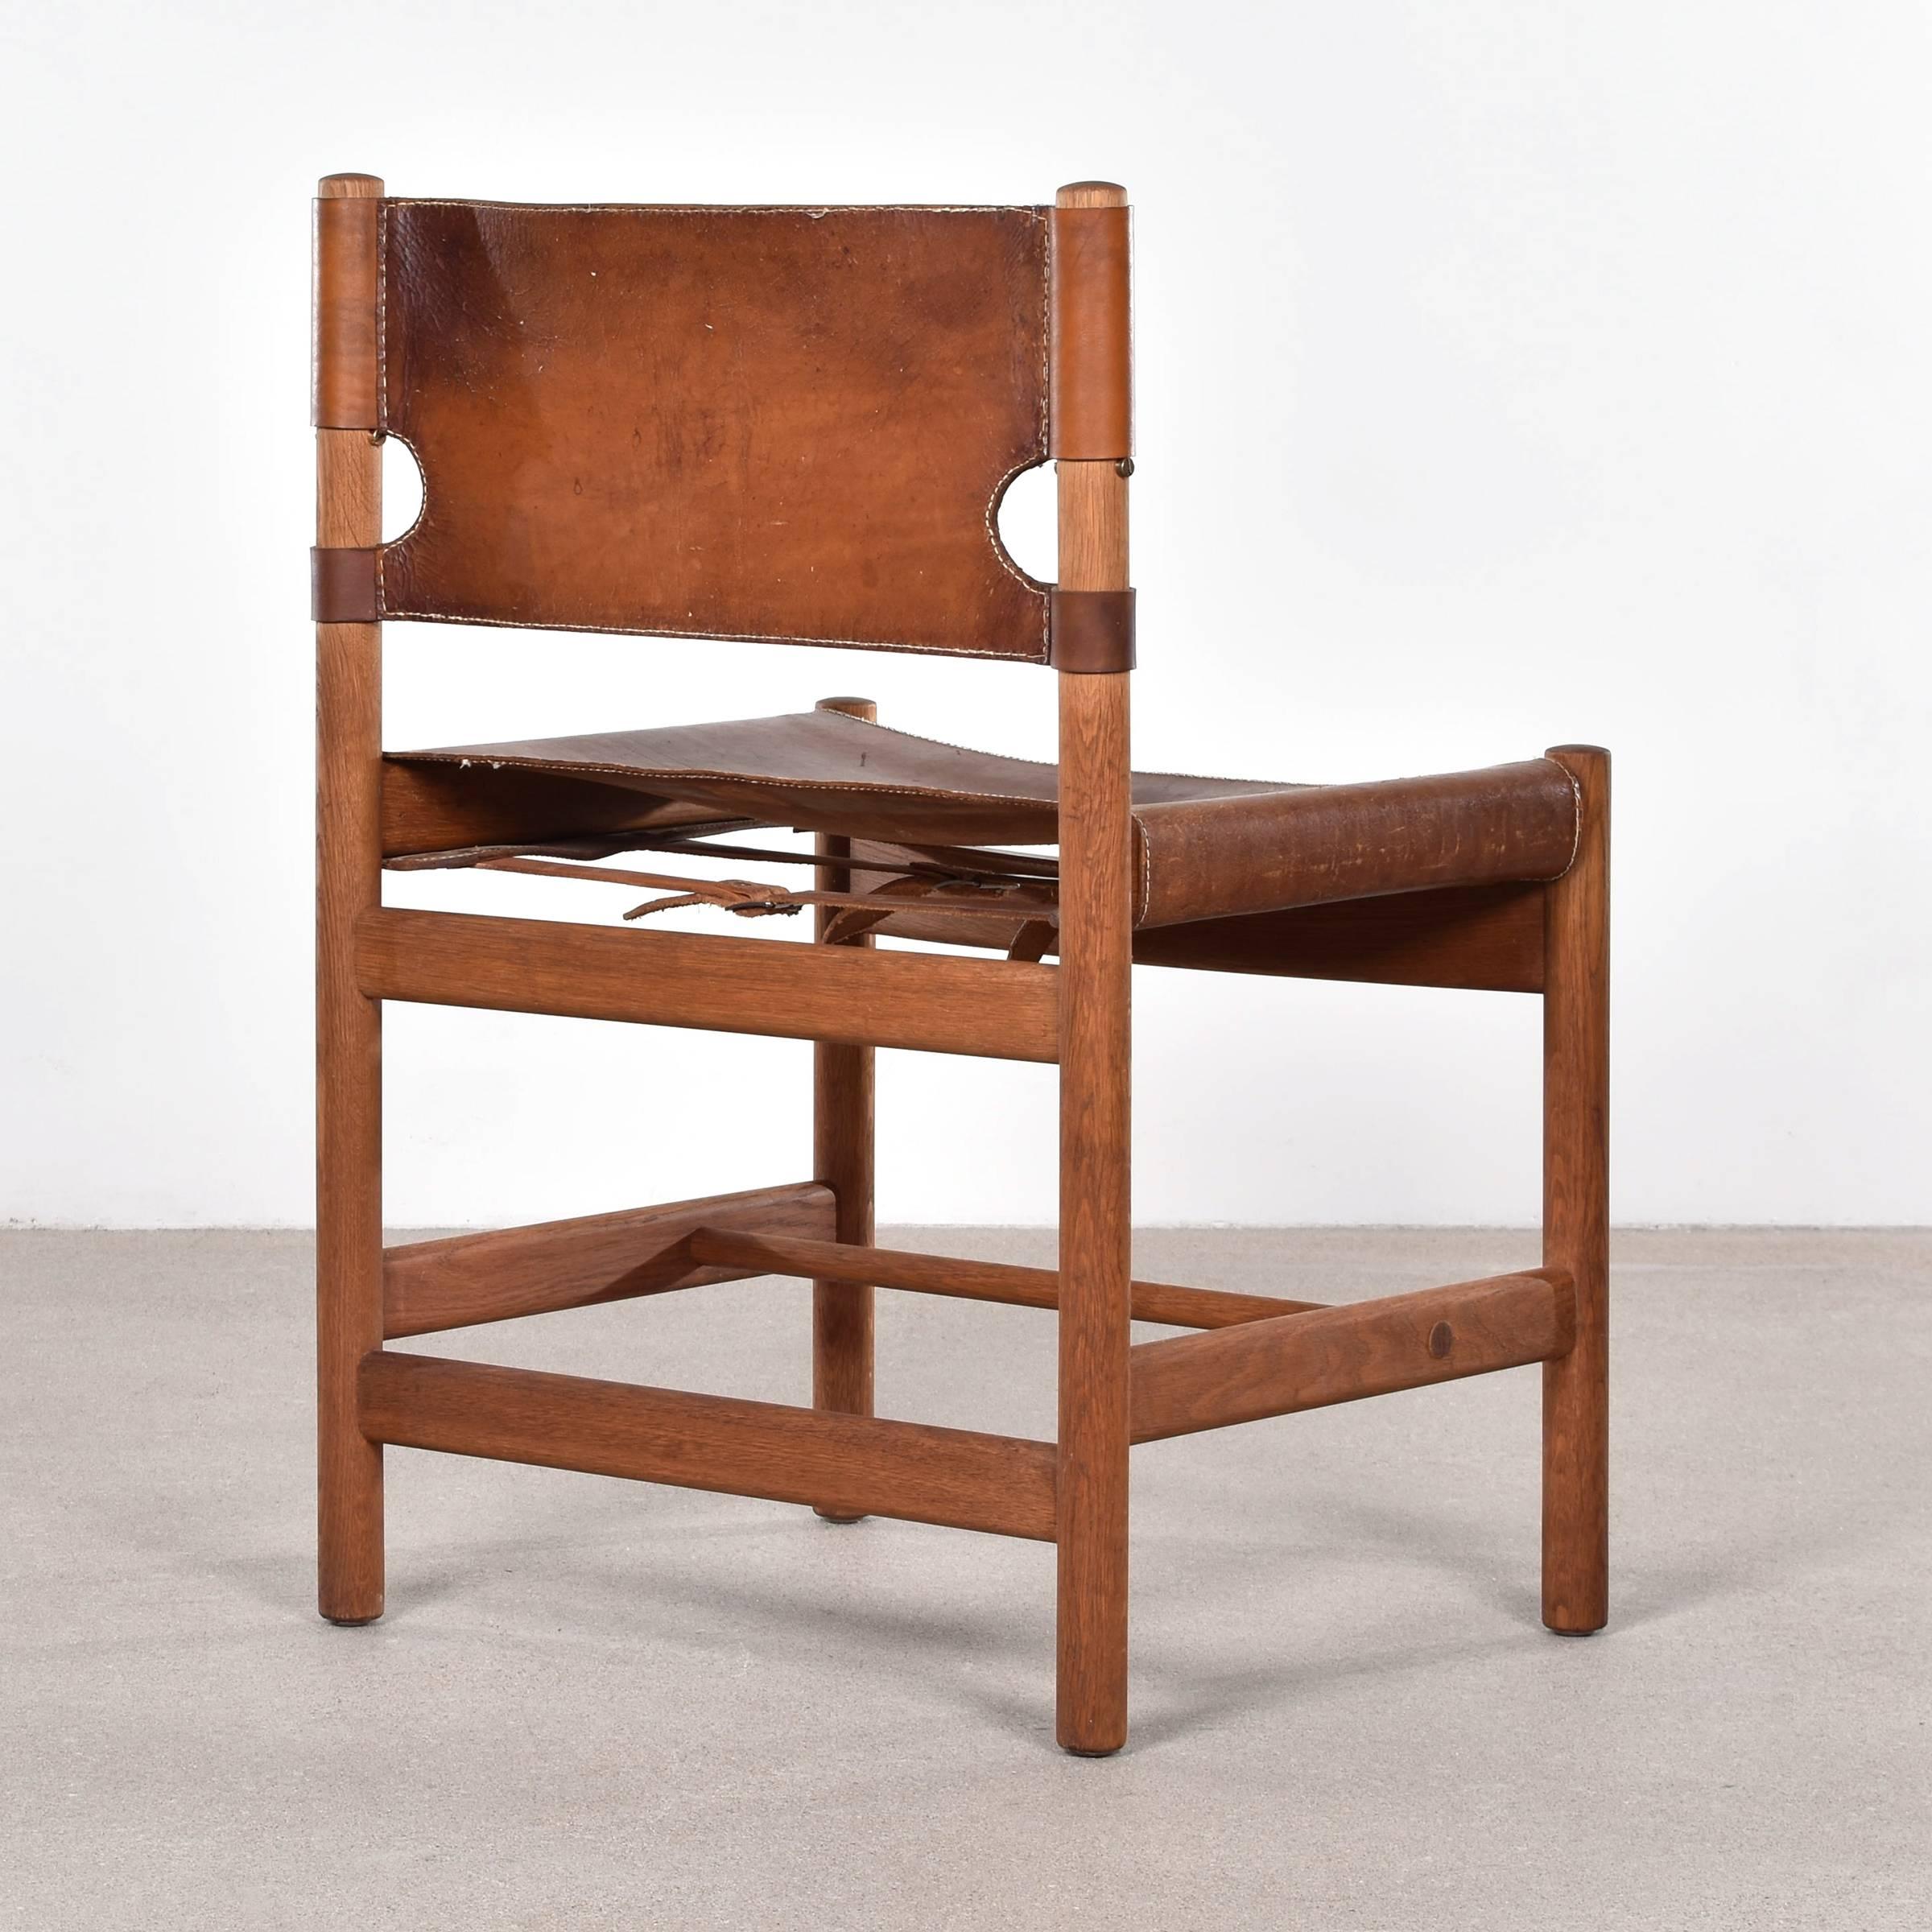 Mid-20th Century Børge Mogensen 'Hunting' Chairs (Model 3251) for Fredericia Furniture